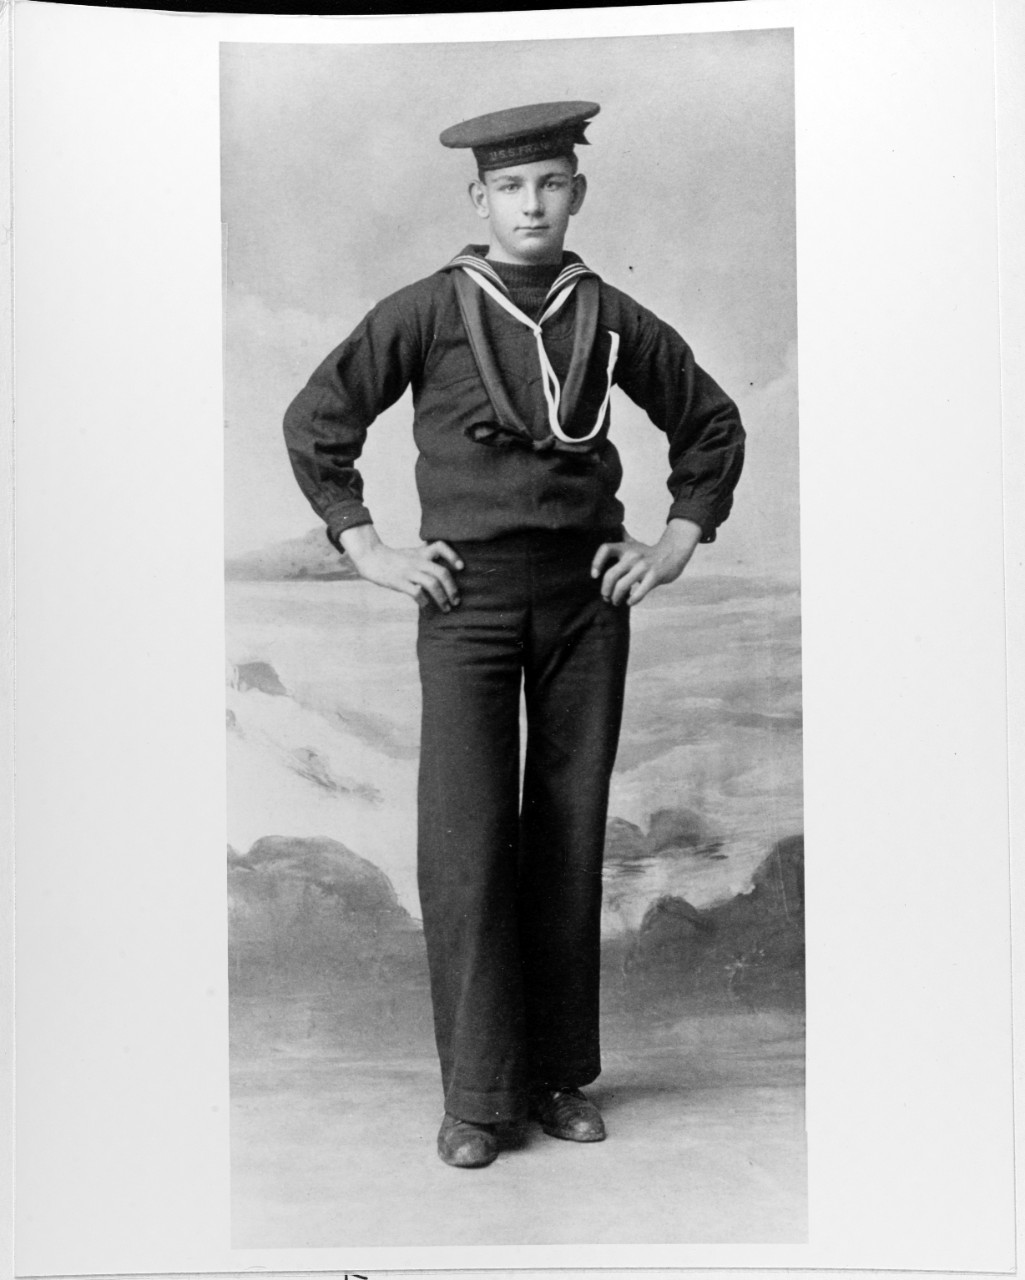 William A. Hopson of USS Franklin